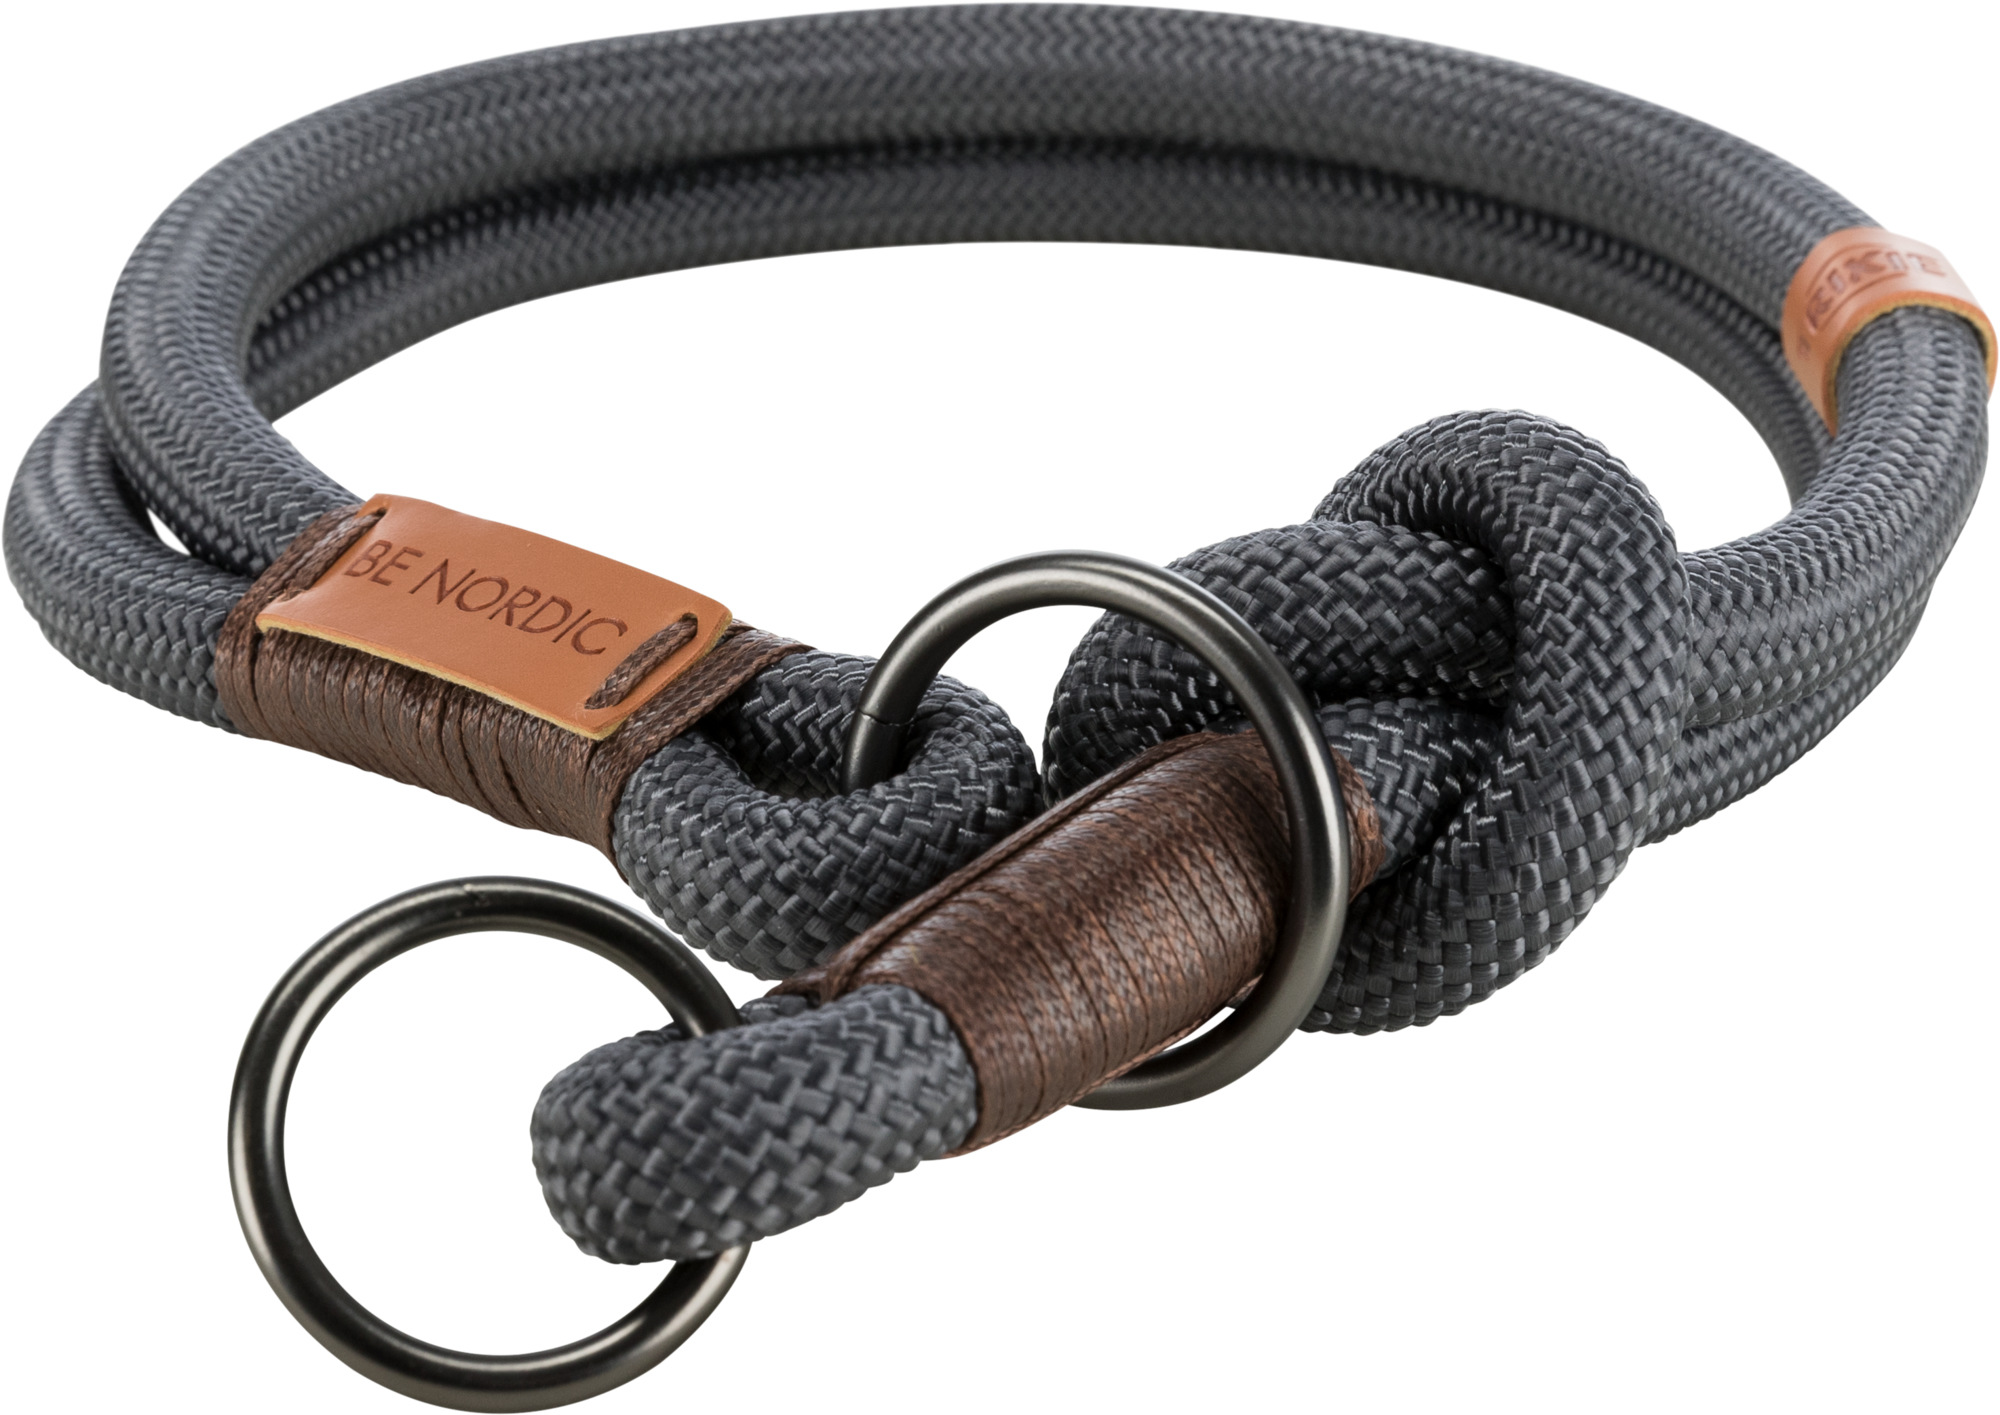 TRIXIE BE NORDIC Zug-Stopp-Halsband TRIXIE BE NORDIC Zug-Stopp-Halsband, M: 45 cm/ø 8 mm, dunkelgrau/braun